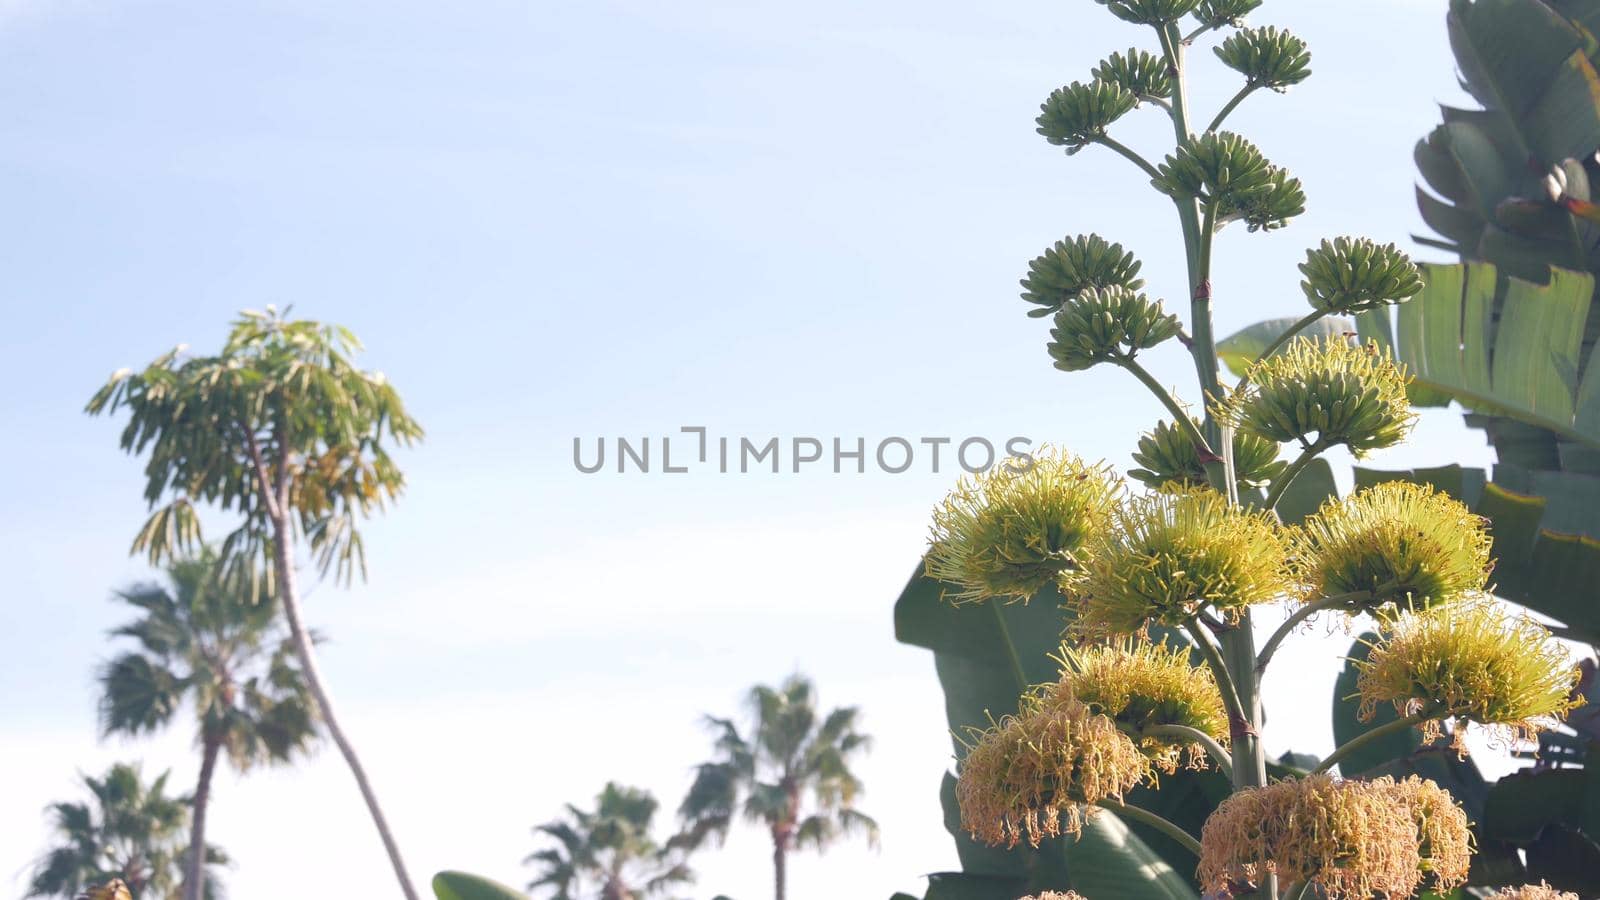 Agave flower, century or sentry plant bloom blossom or inflorescence. California by DogoraSun